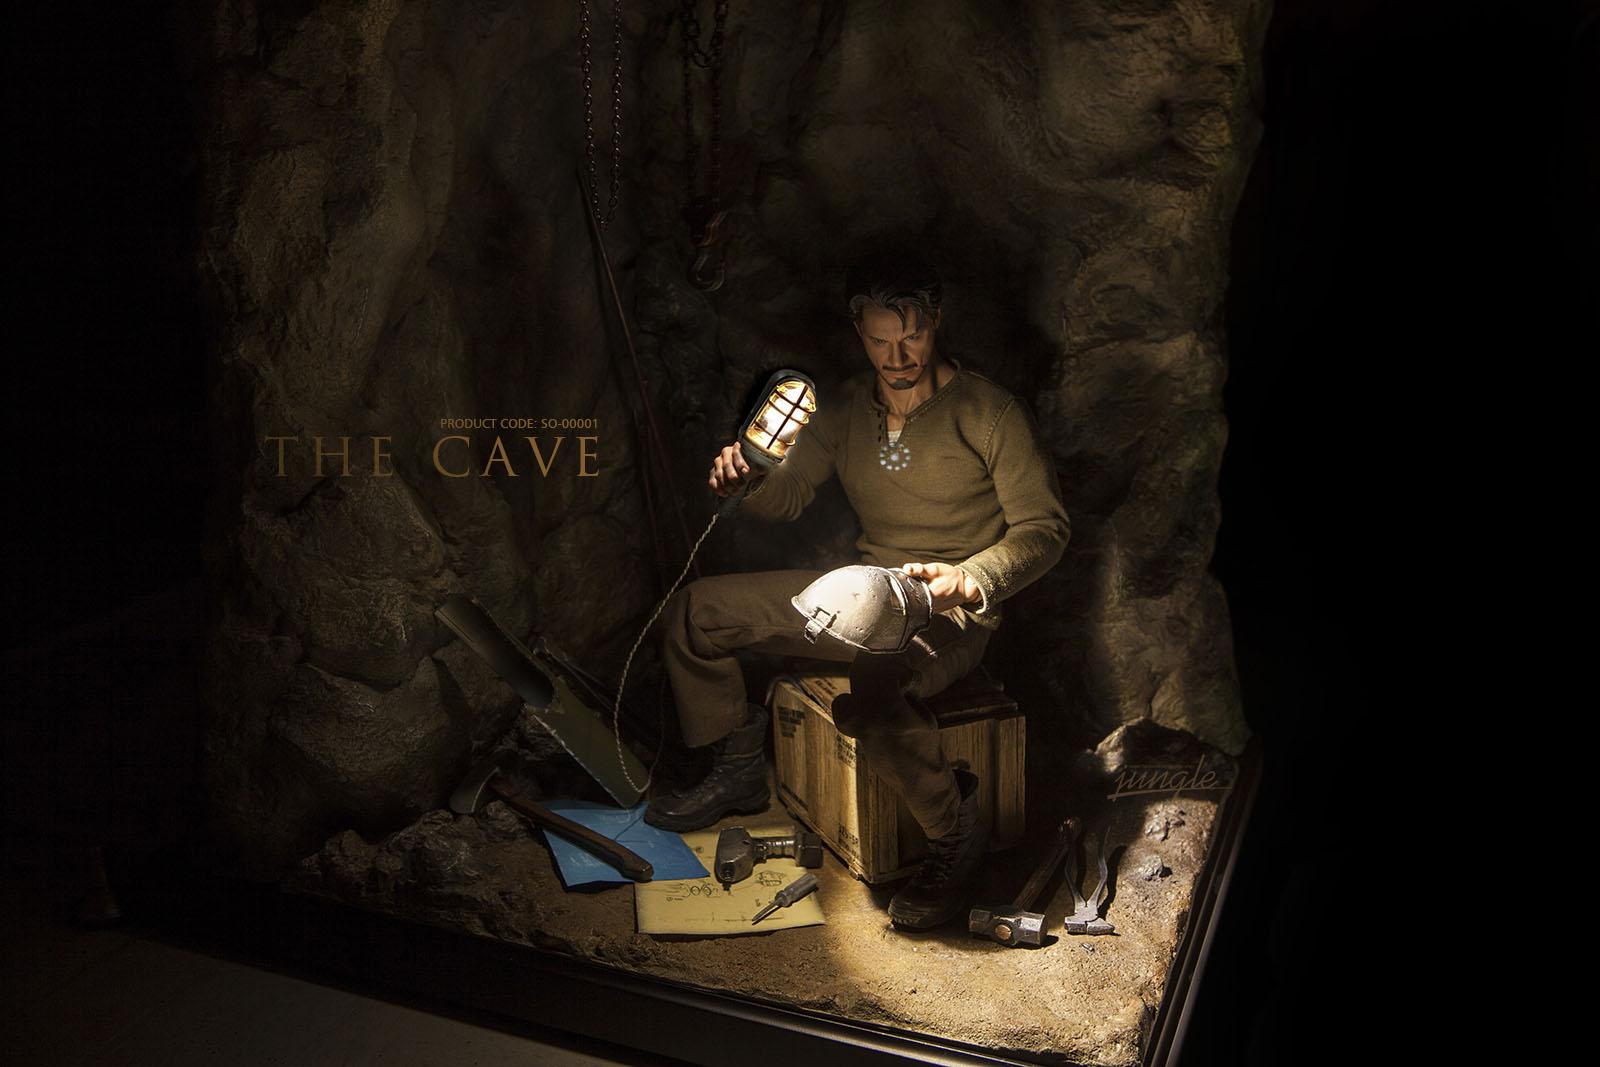 onesixthscalepictures: IHNS Toys THE CAVE : Latest product news for 1/6 scale figures ...1600 x 1067